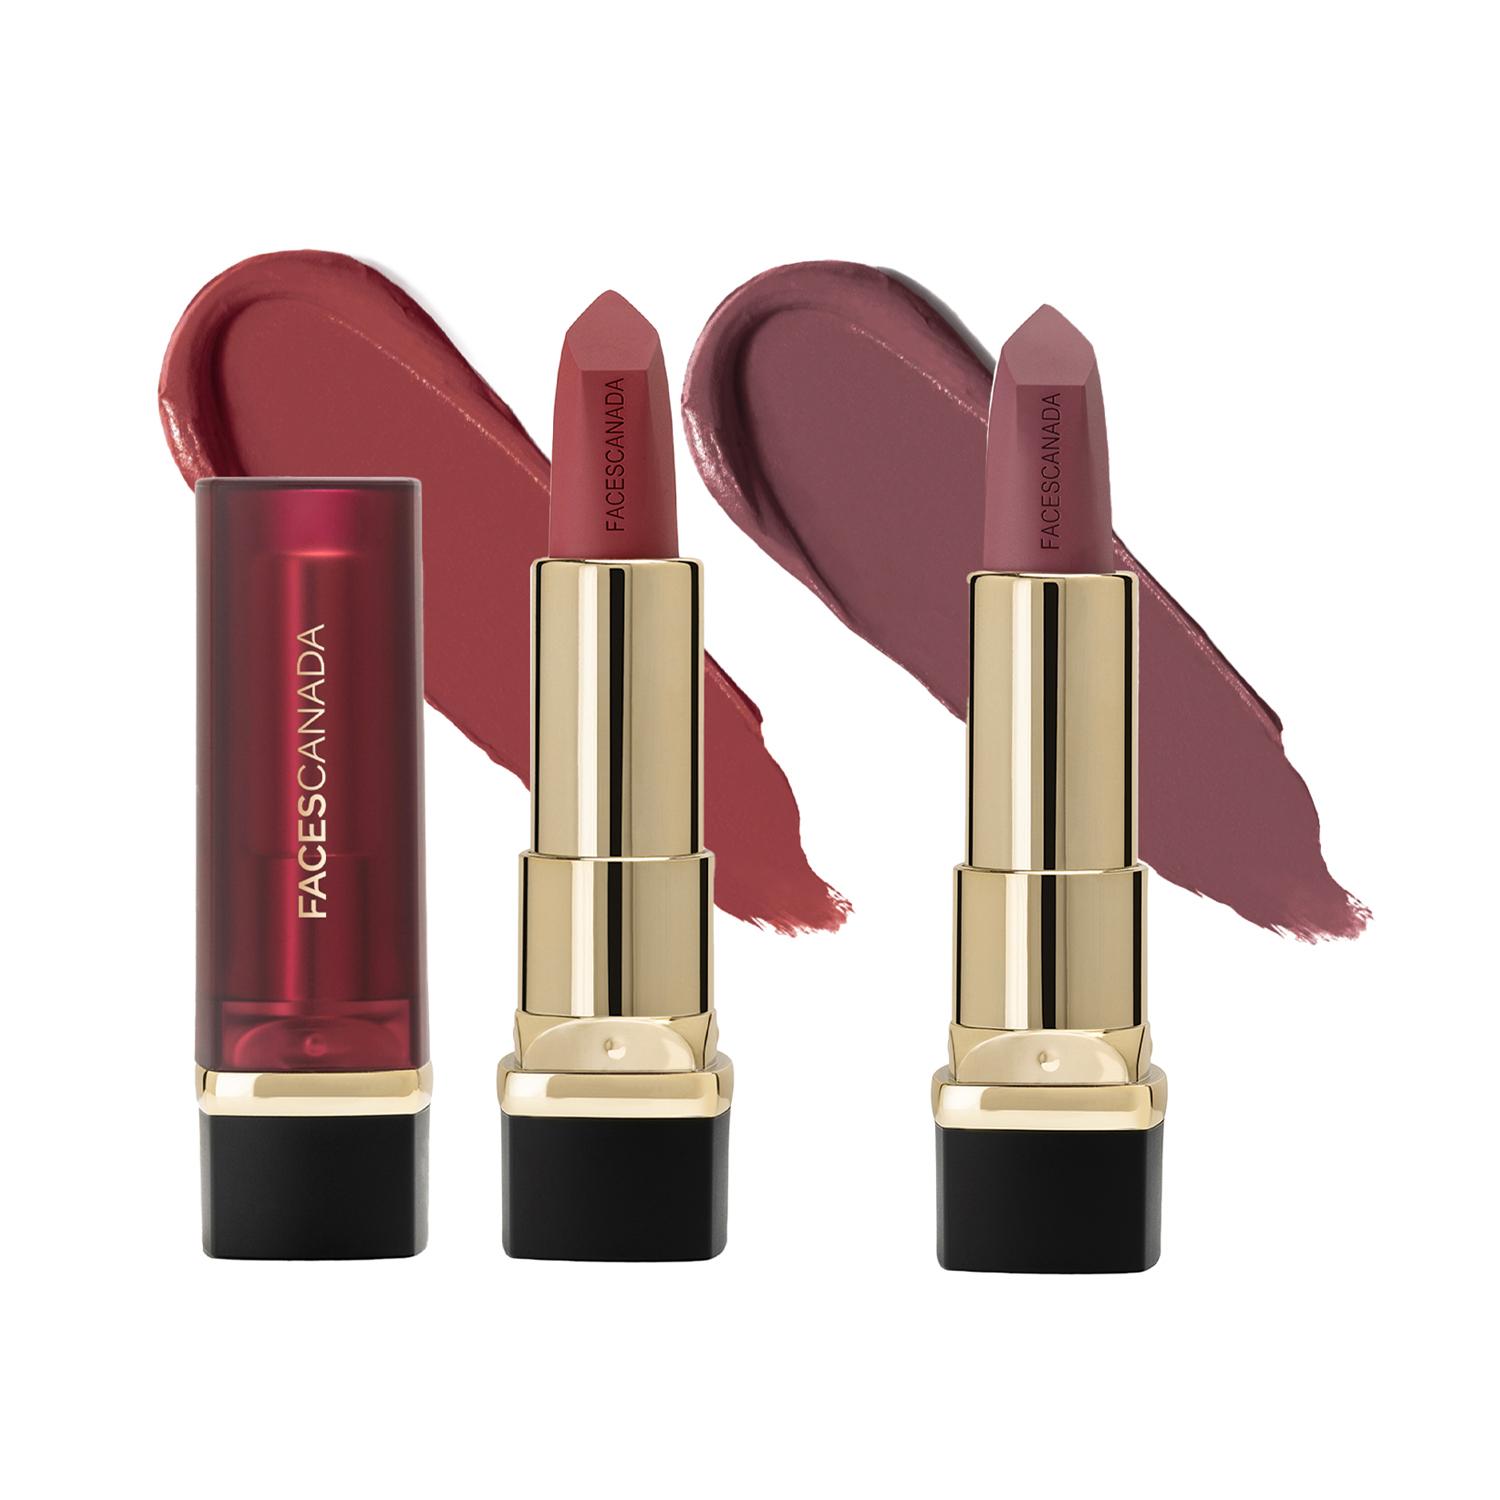 Faces Canada | Faces Canada Festive Hues - Comfy Matte Creme Lipstick Pack of 2 - Livin' It Up & Keepin’ It Real